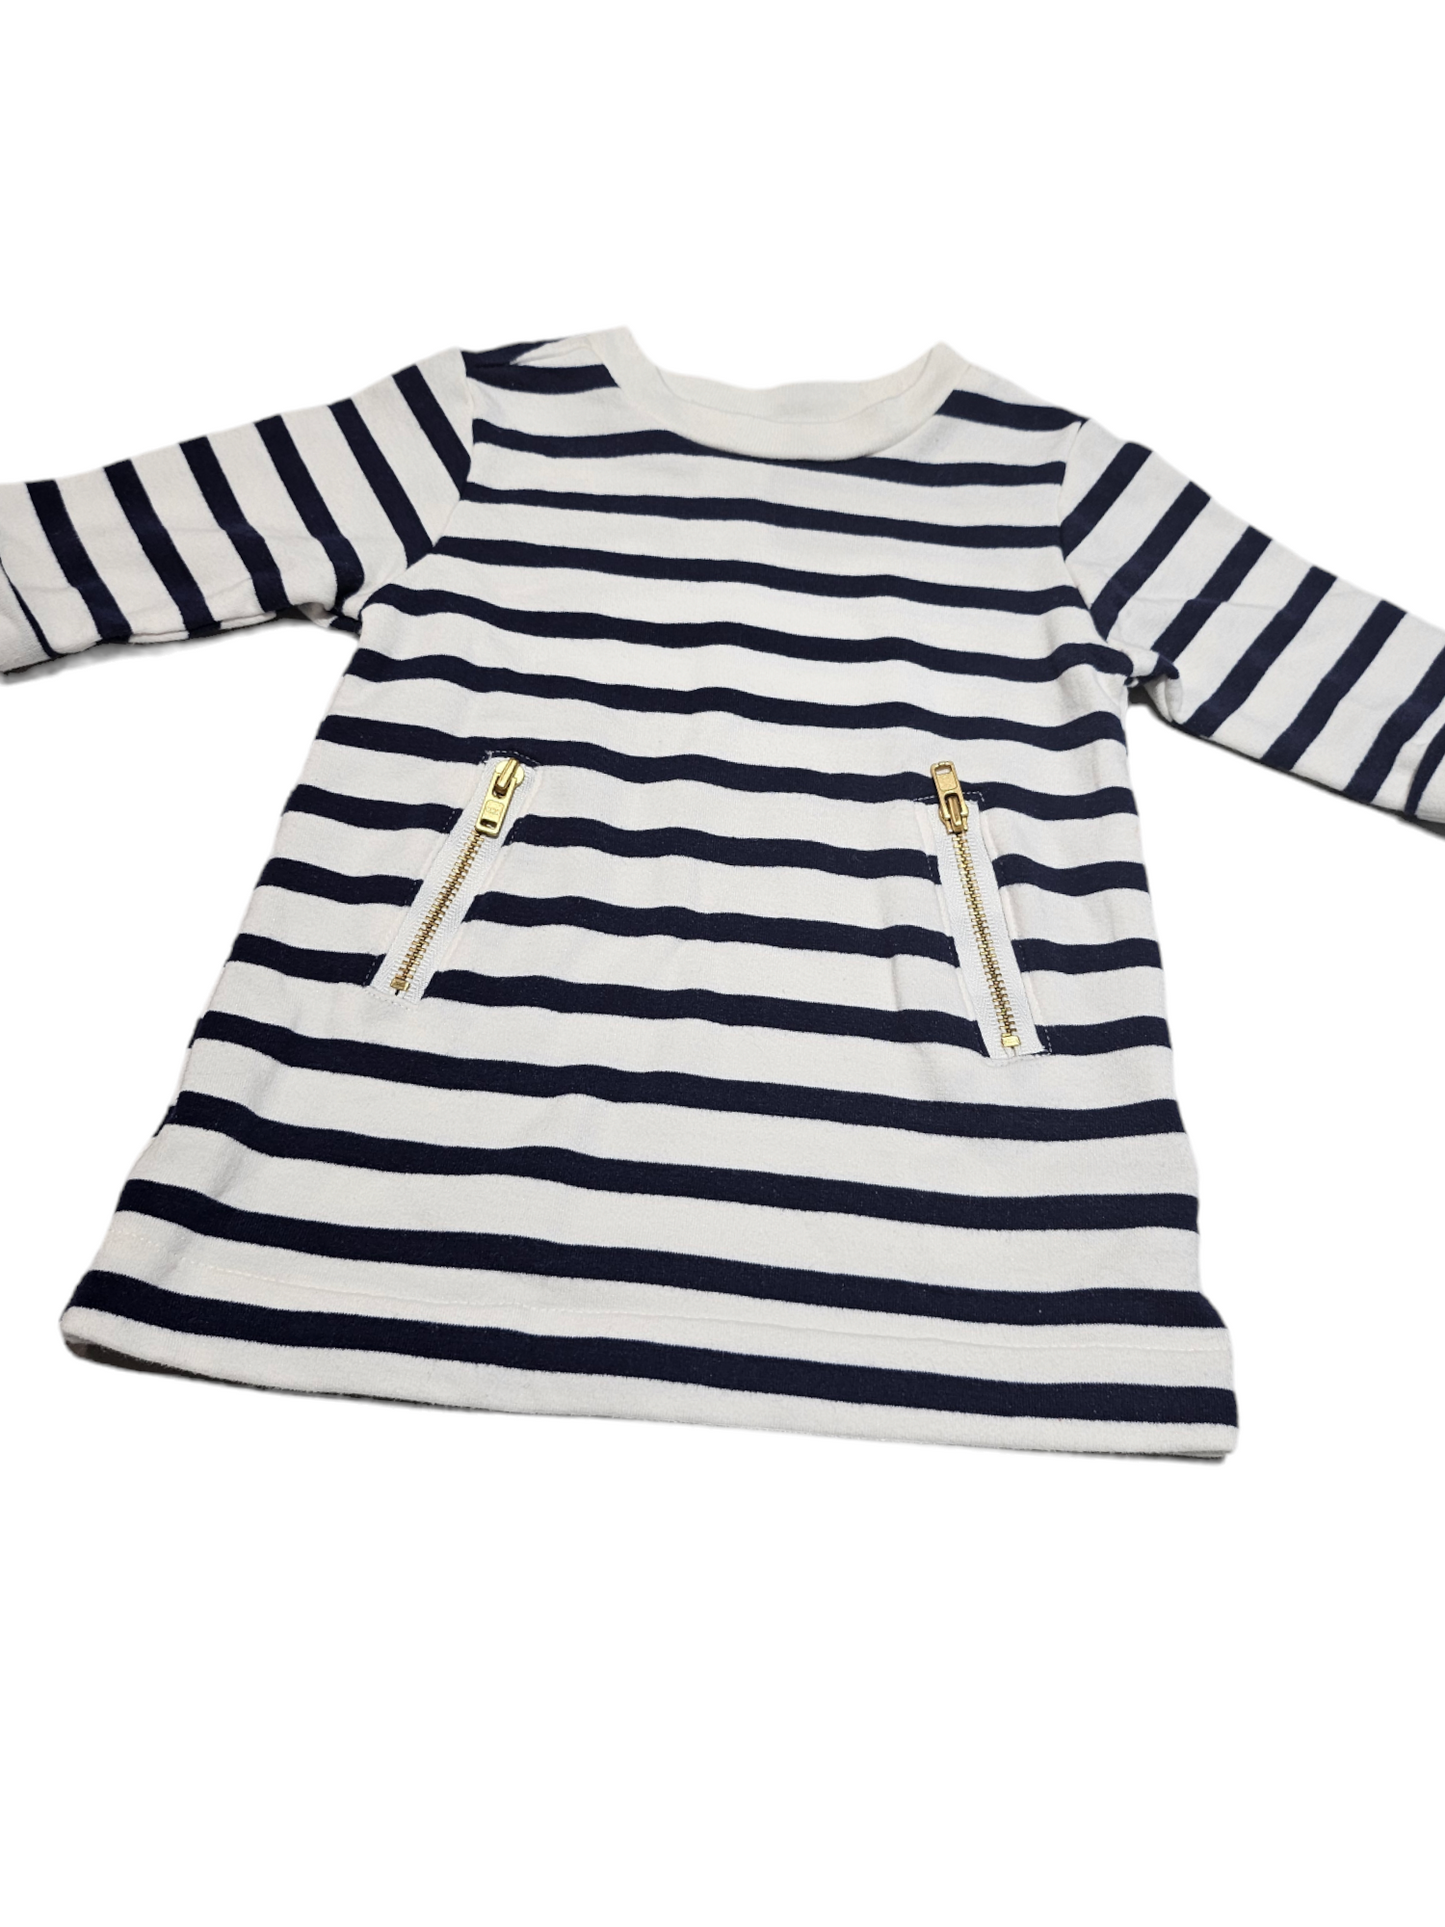 Chic size 0-3m